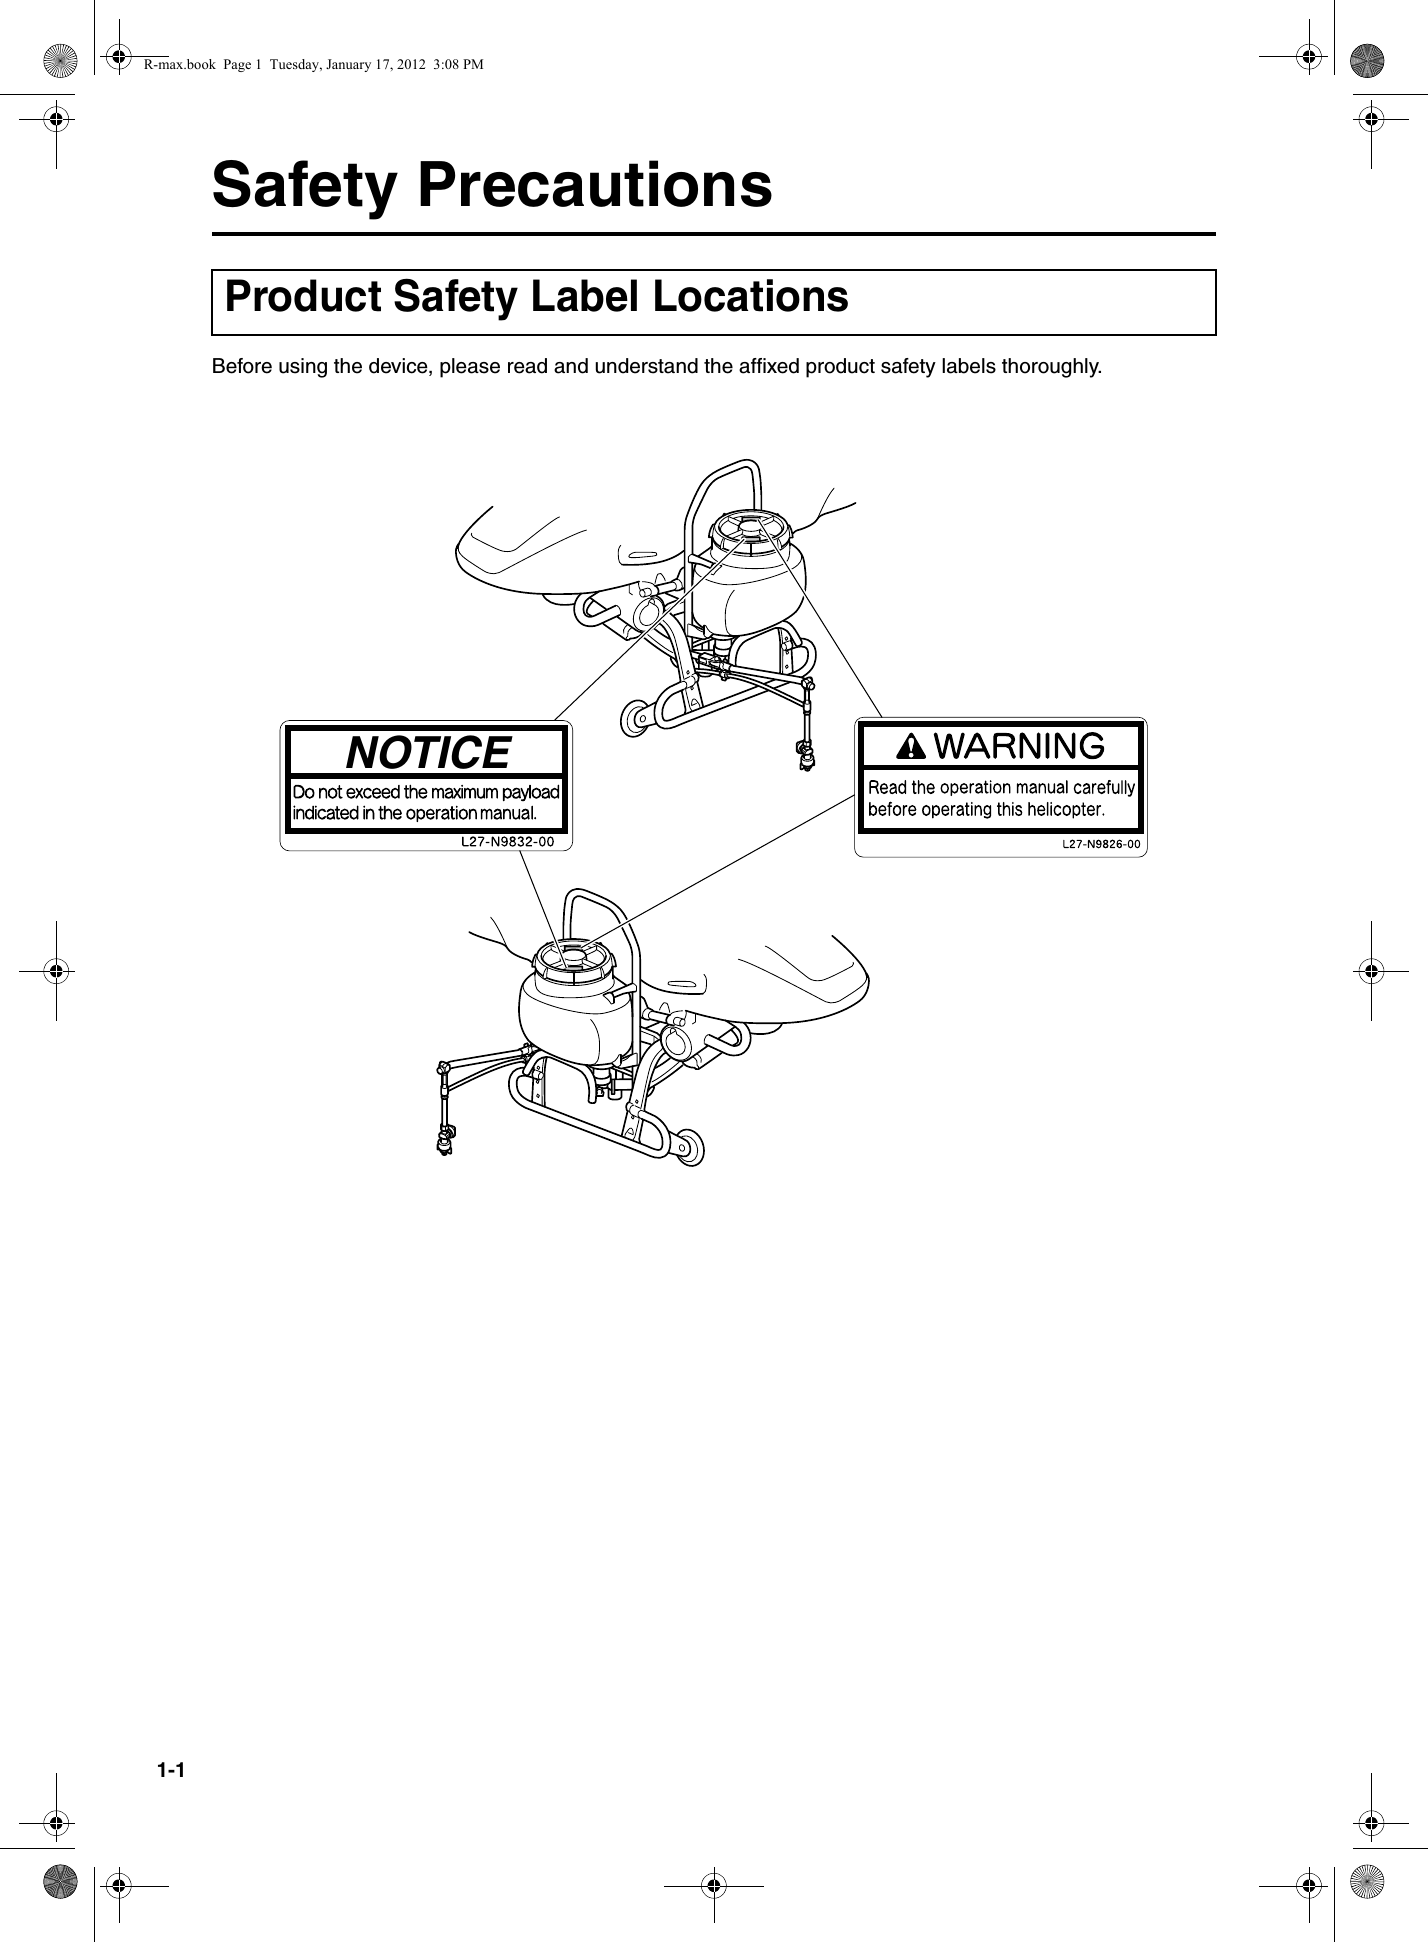 1-1Safety PrecautionsBefore using the device, please read and understand the affixed product safety labels thoroughly.Product Safety Label LocationsNOTICER-max.book  Page 1  Tuesday, January 17, 2012  3:08 PM